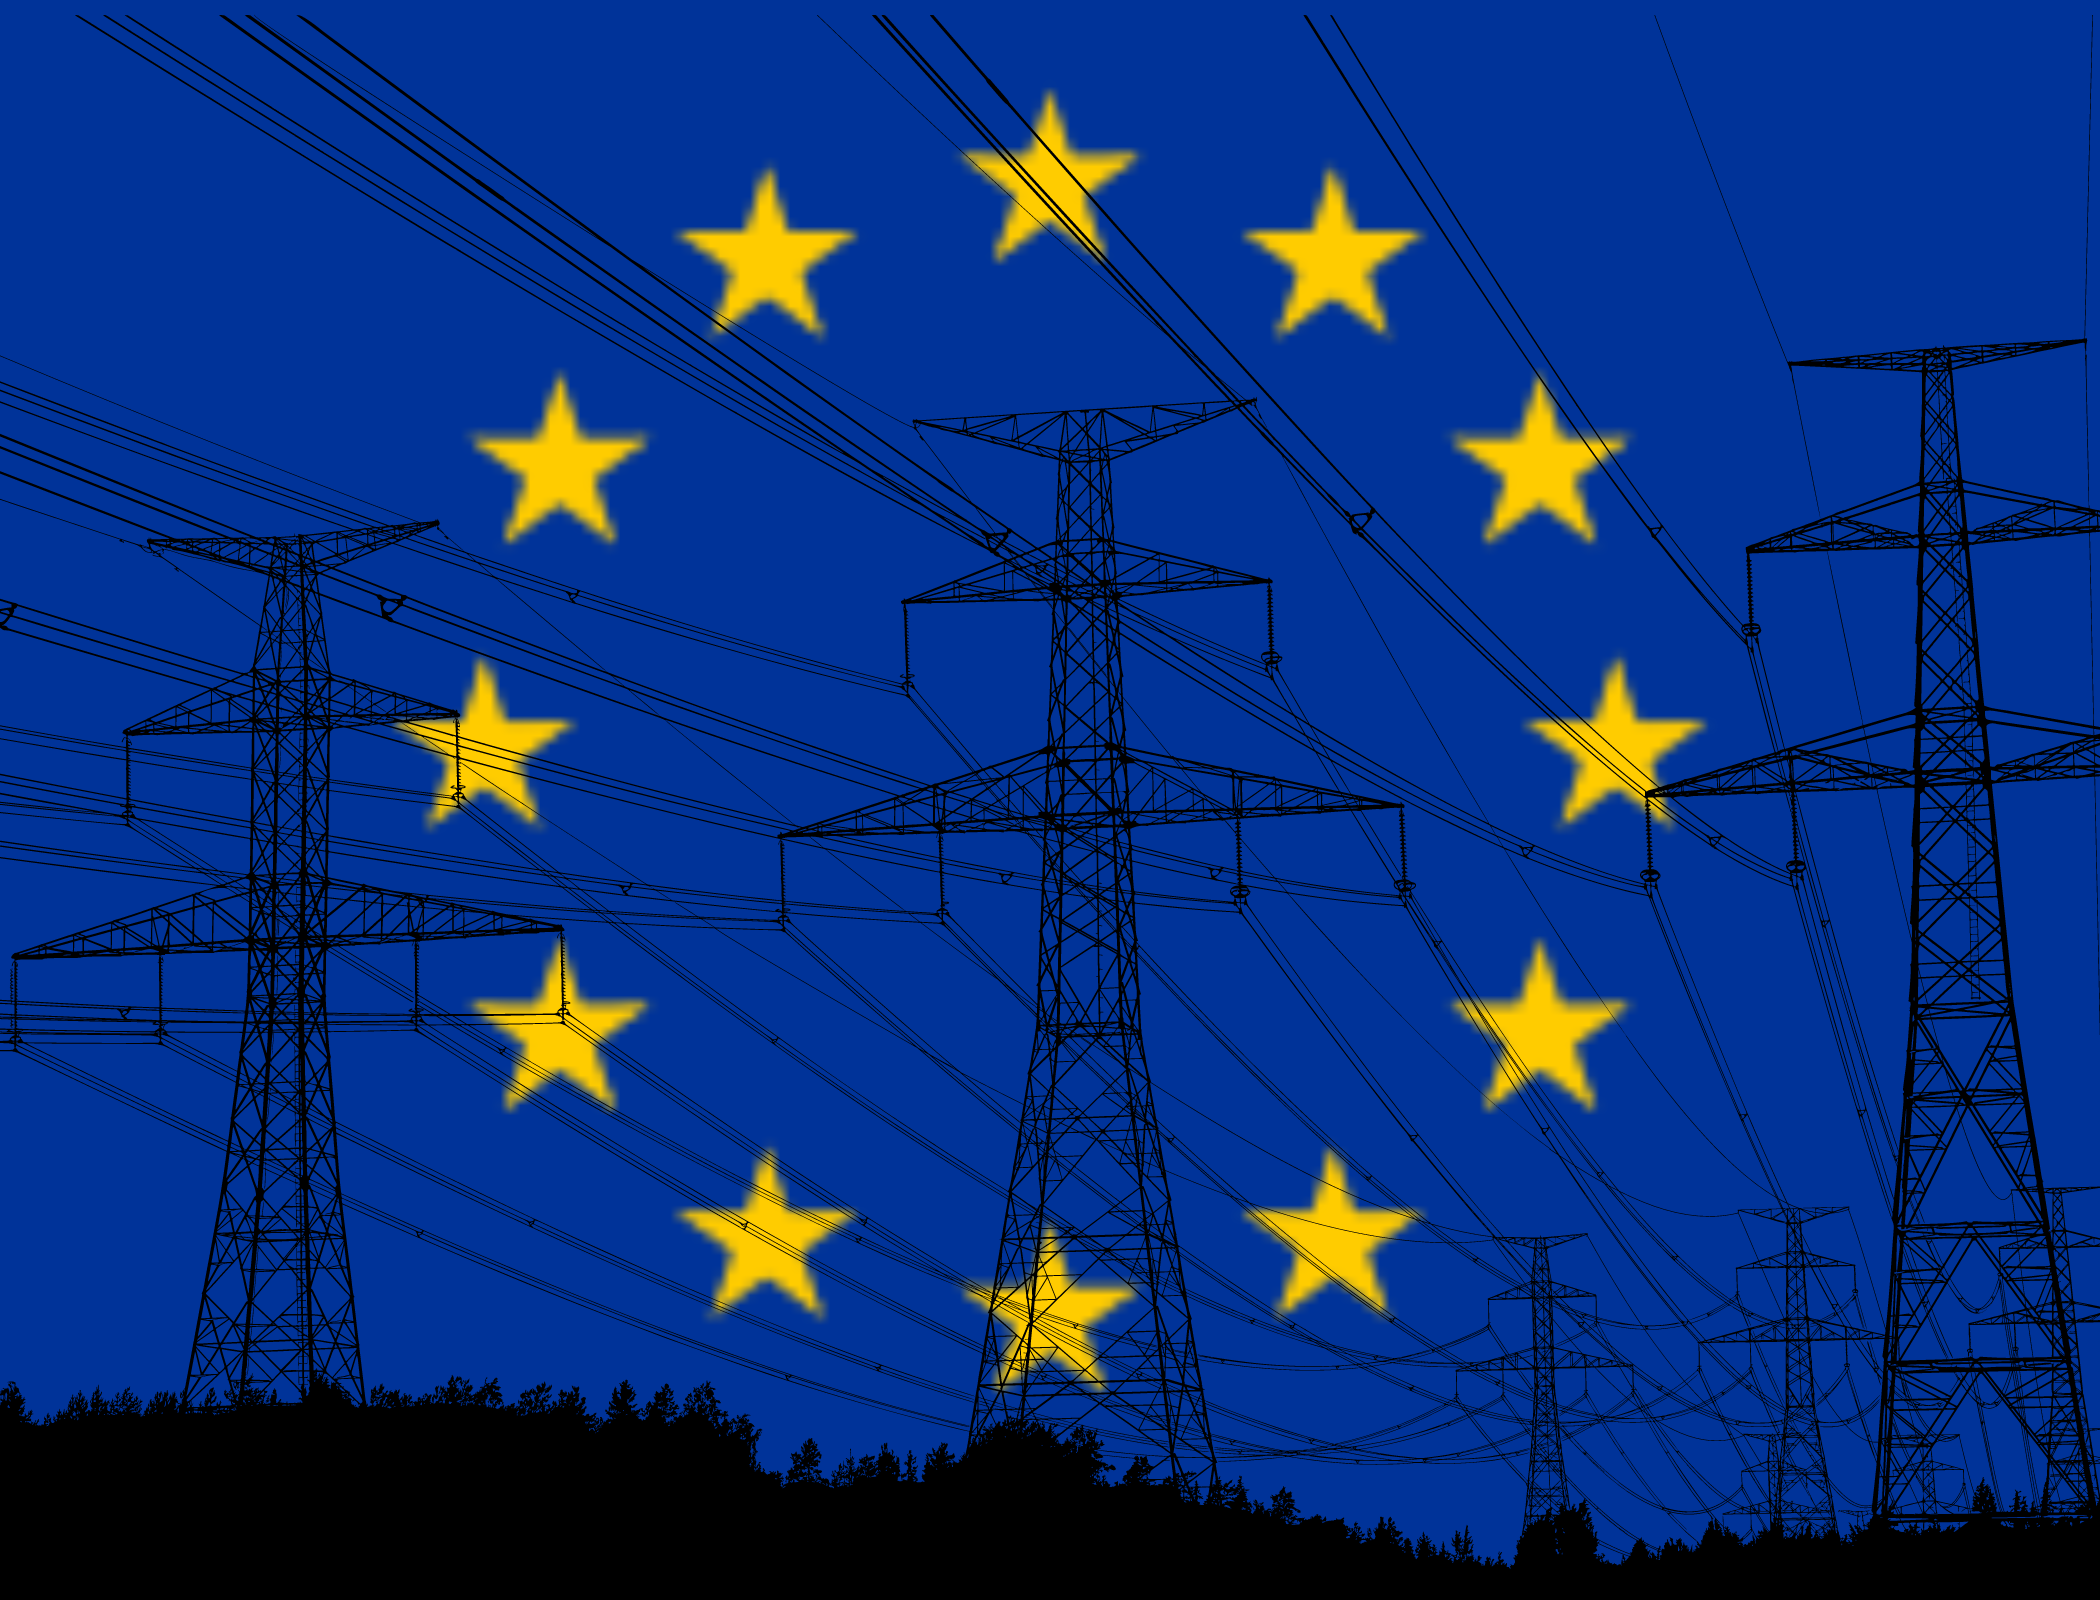 EU agrees to reform the energy market with consensus on nuclear power